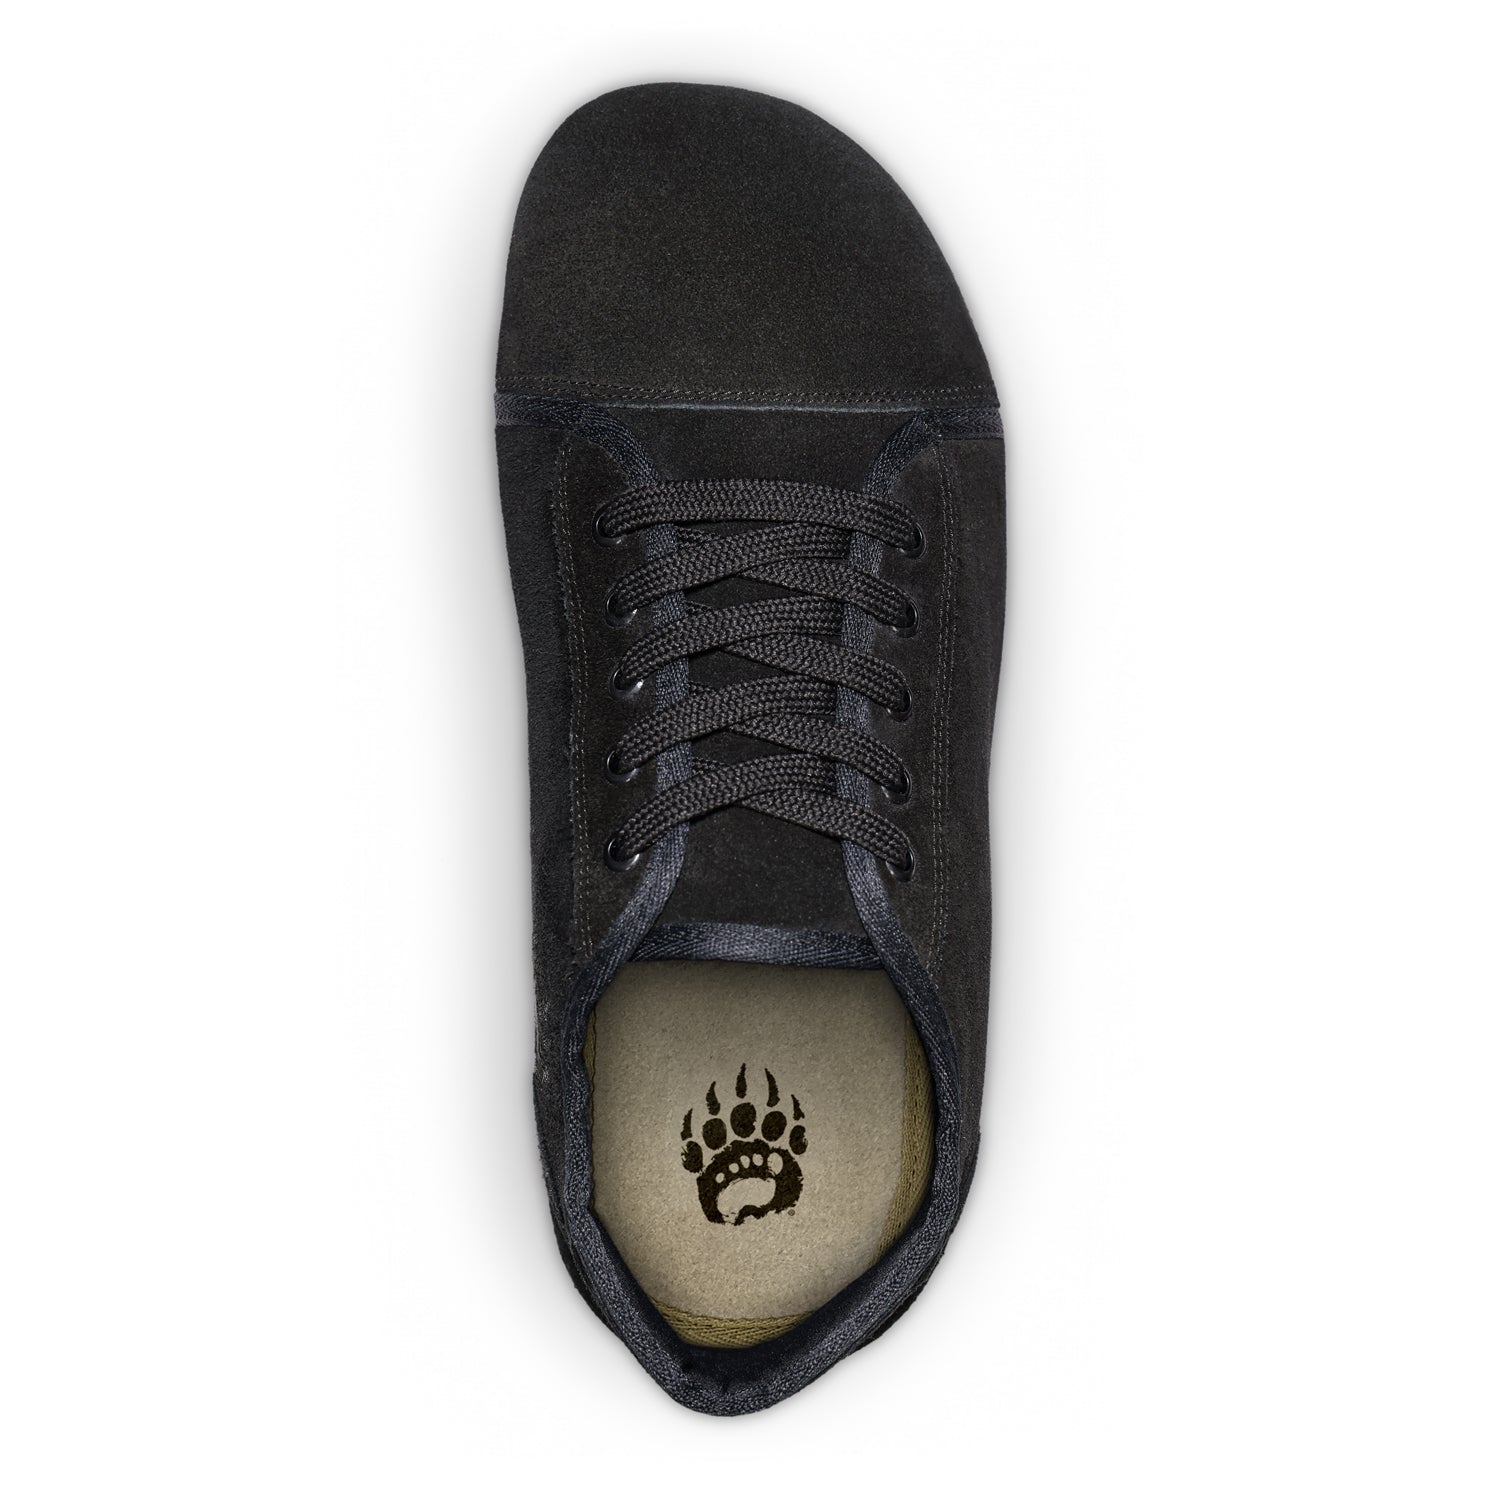 Top view of a single black canvas sneaker with laces, featuring a paw print design on the insole, isolated on white. This versatile training sneaker is ideal for strength athletes.
Product Name: Bearfoot Ursus Suede | Low-Top | Black